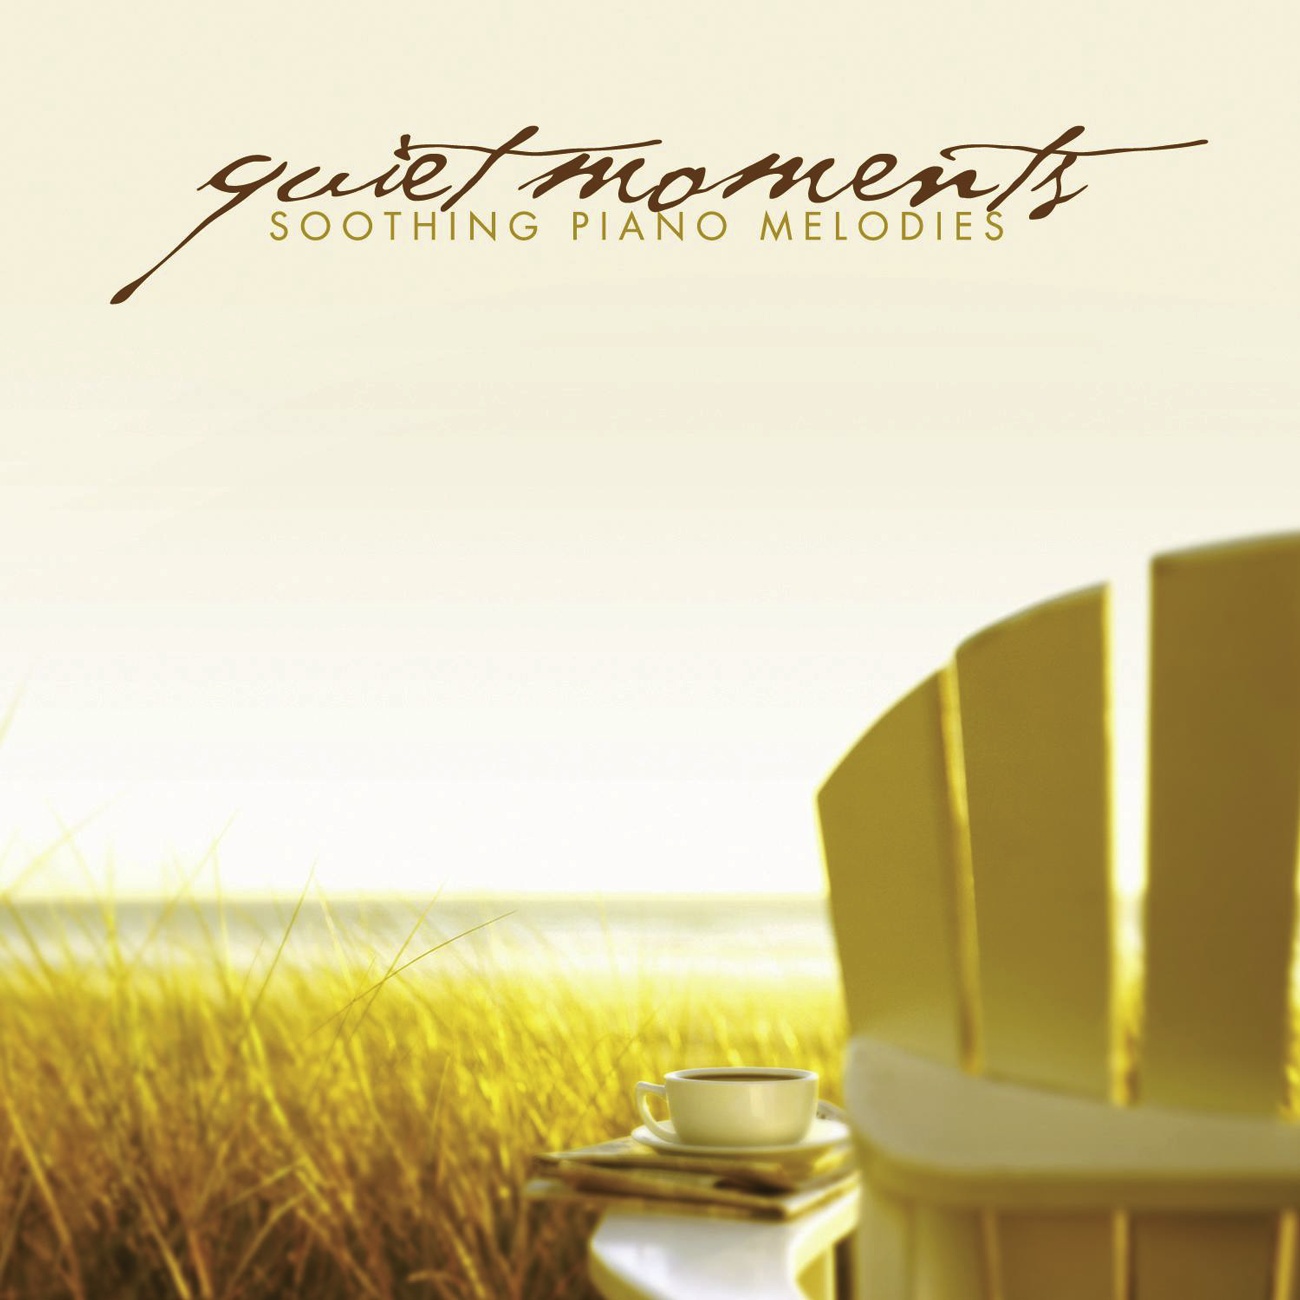 Somewhere Out There (from An American Tale) (Quiet Moments Album Version)